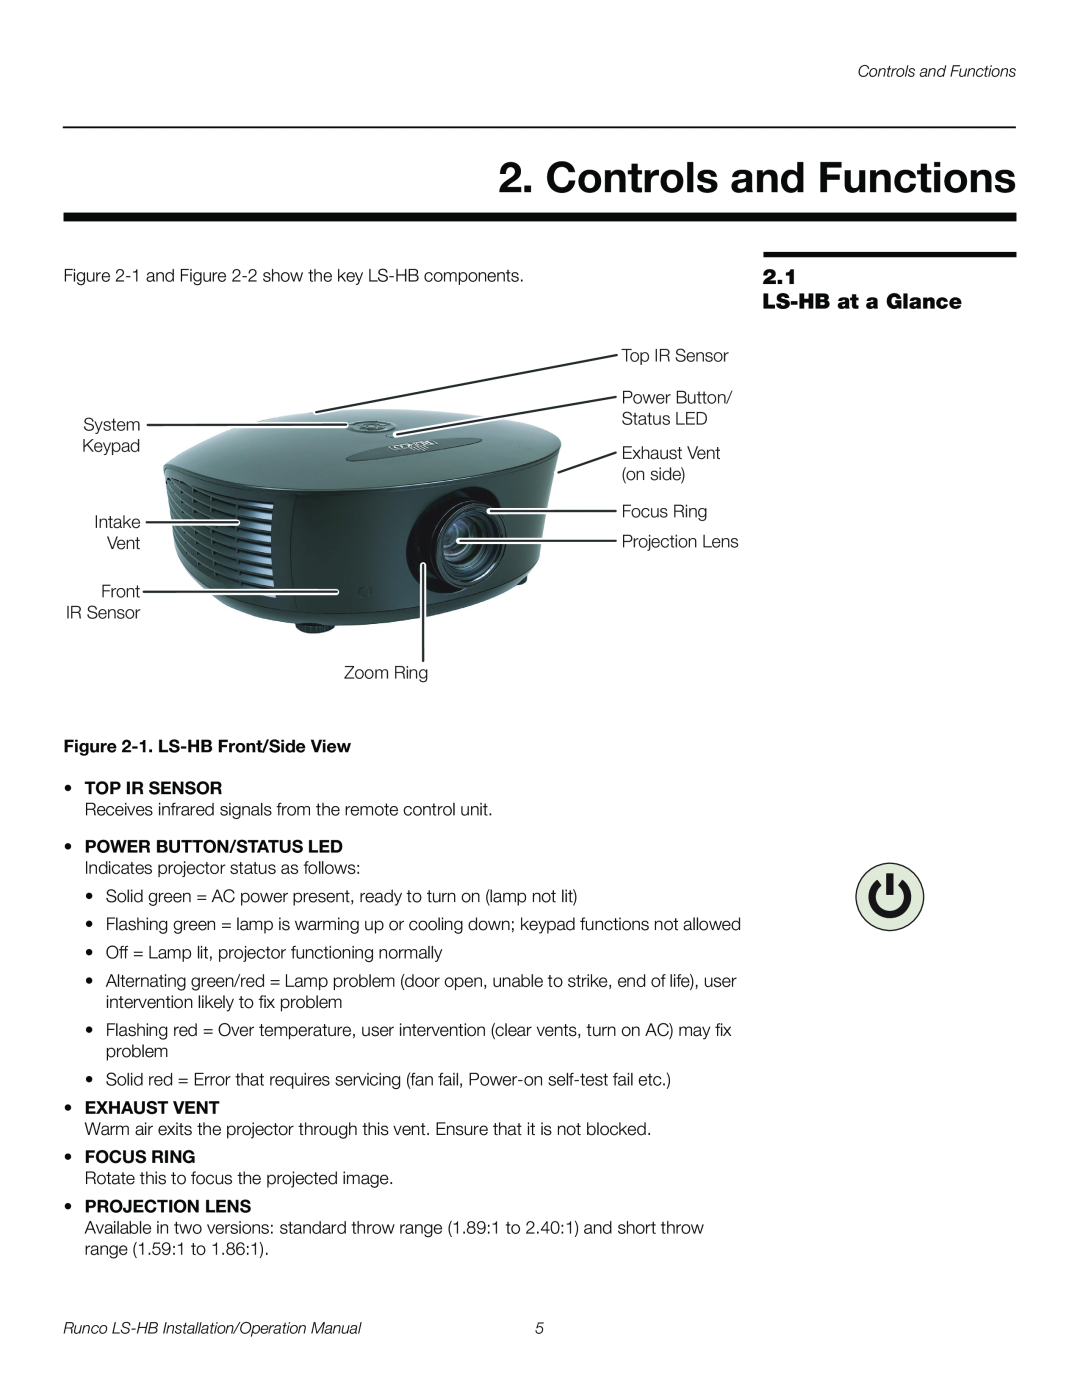 Runco Controls and Functions, LS-HB at a Glance, 1. LS-HB Front/Side View TOP IR SENSOR, Exhaust Vent, Focus Ring 